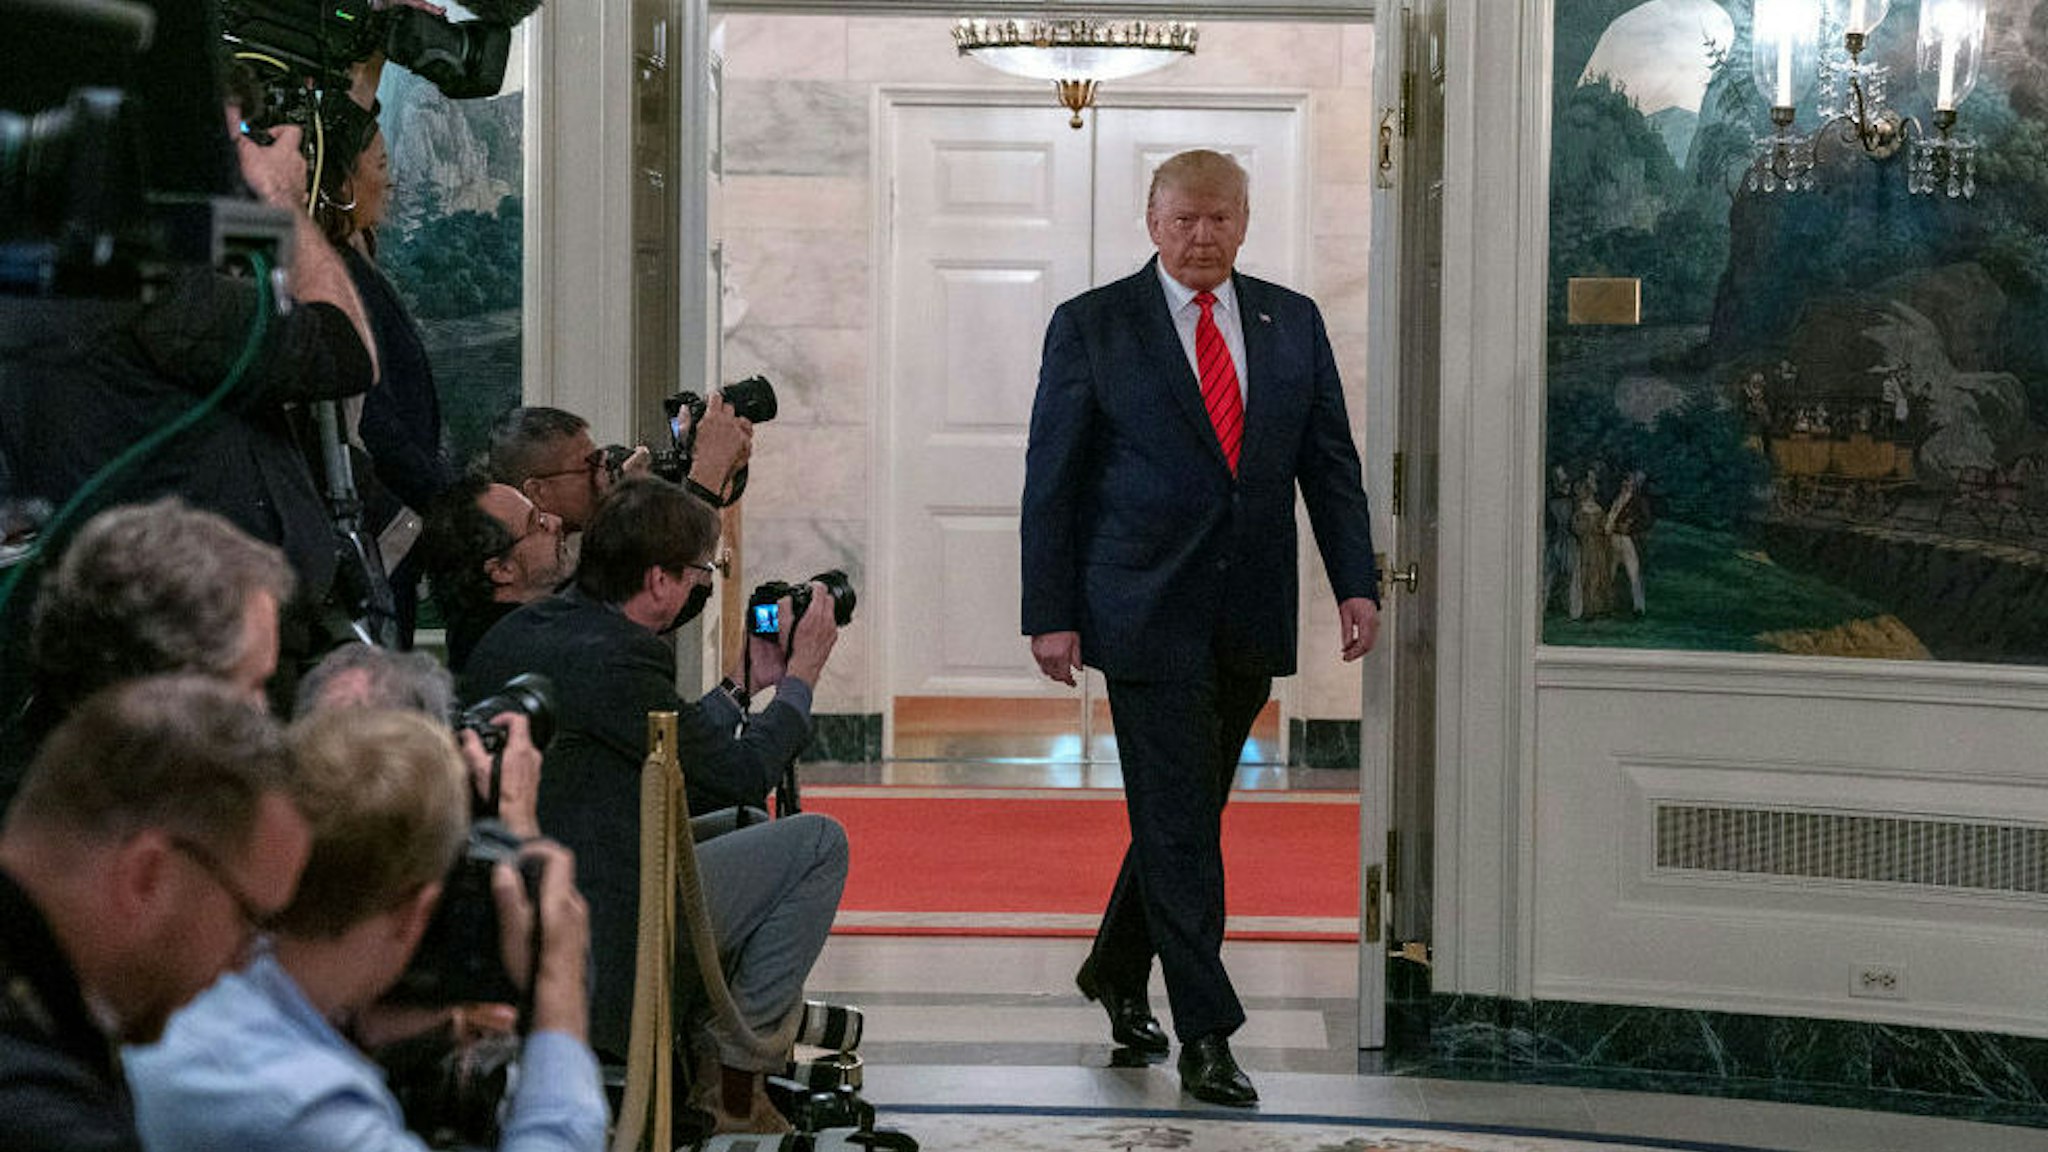 U.S. President Donald Trump enters the Diplomatic Reception Room of the White House to make a statement October 27, 2019 in Washington, DC. President Trump announced that ISIS leader Abu Bakr al-Baghdadi has been killed in a military operation in northwest Syria. (Photo by Tasos Katopodis/Getty Images)